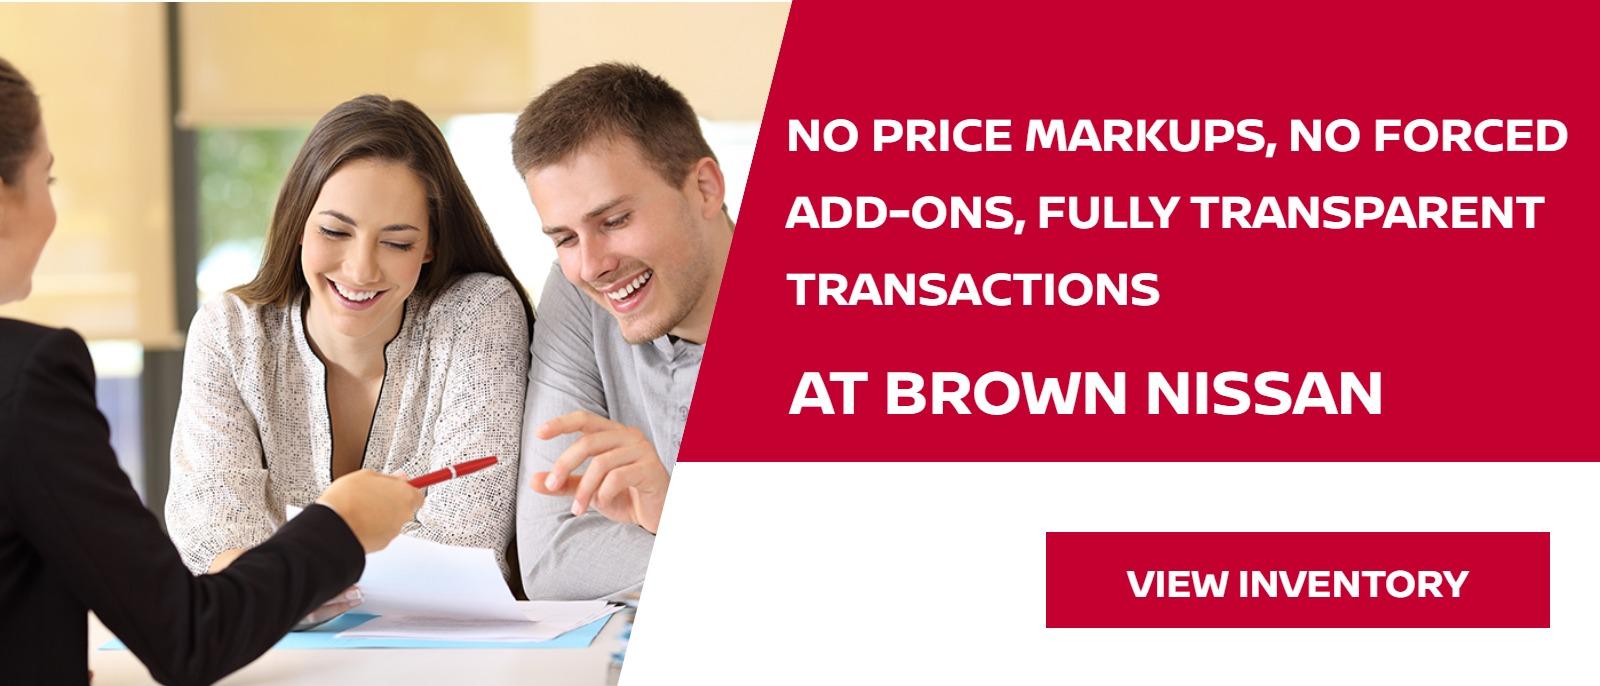 No price markups, no forced add-ons, fully transparent transactions at Brown Nissan